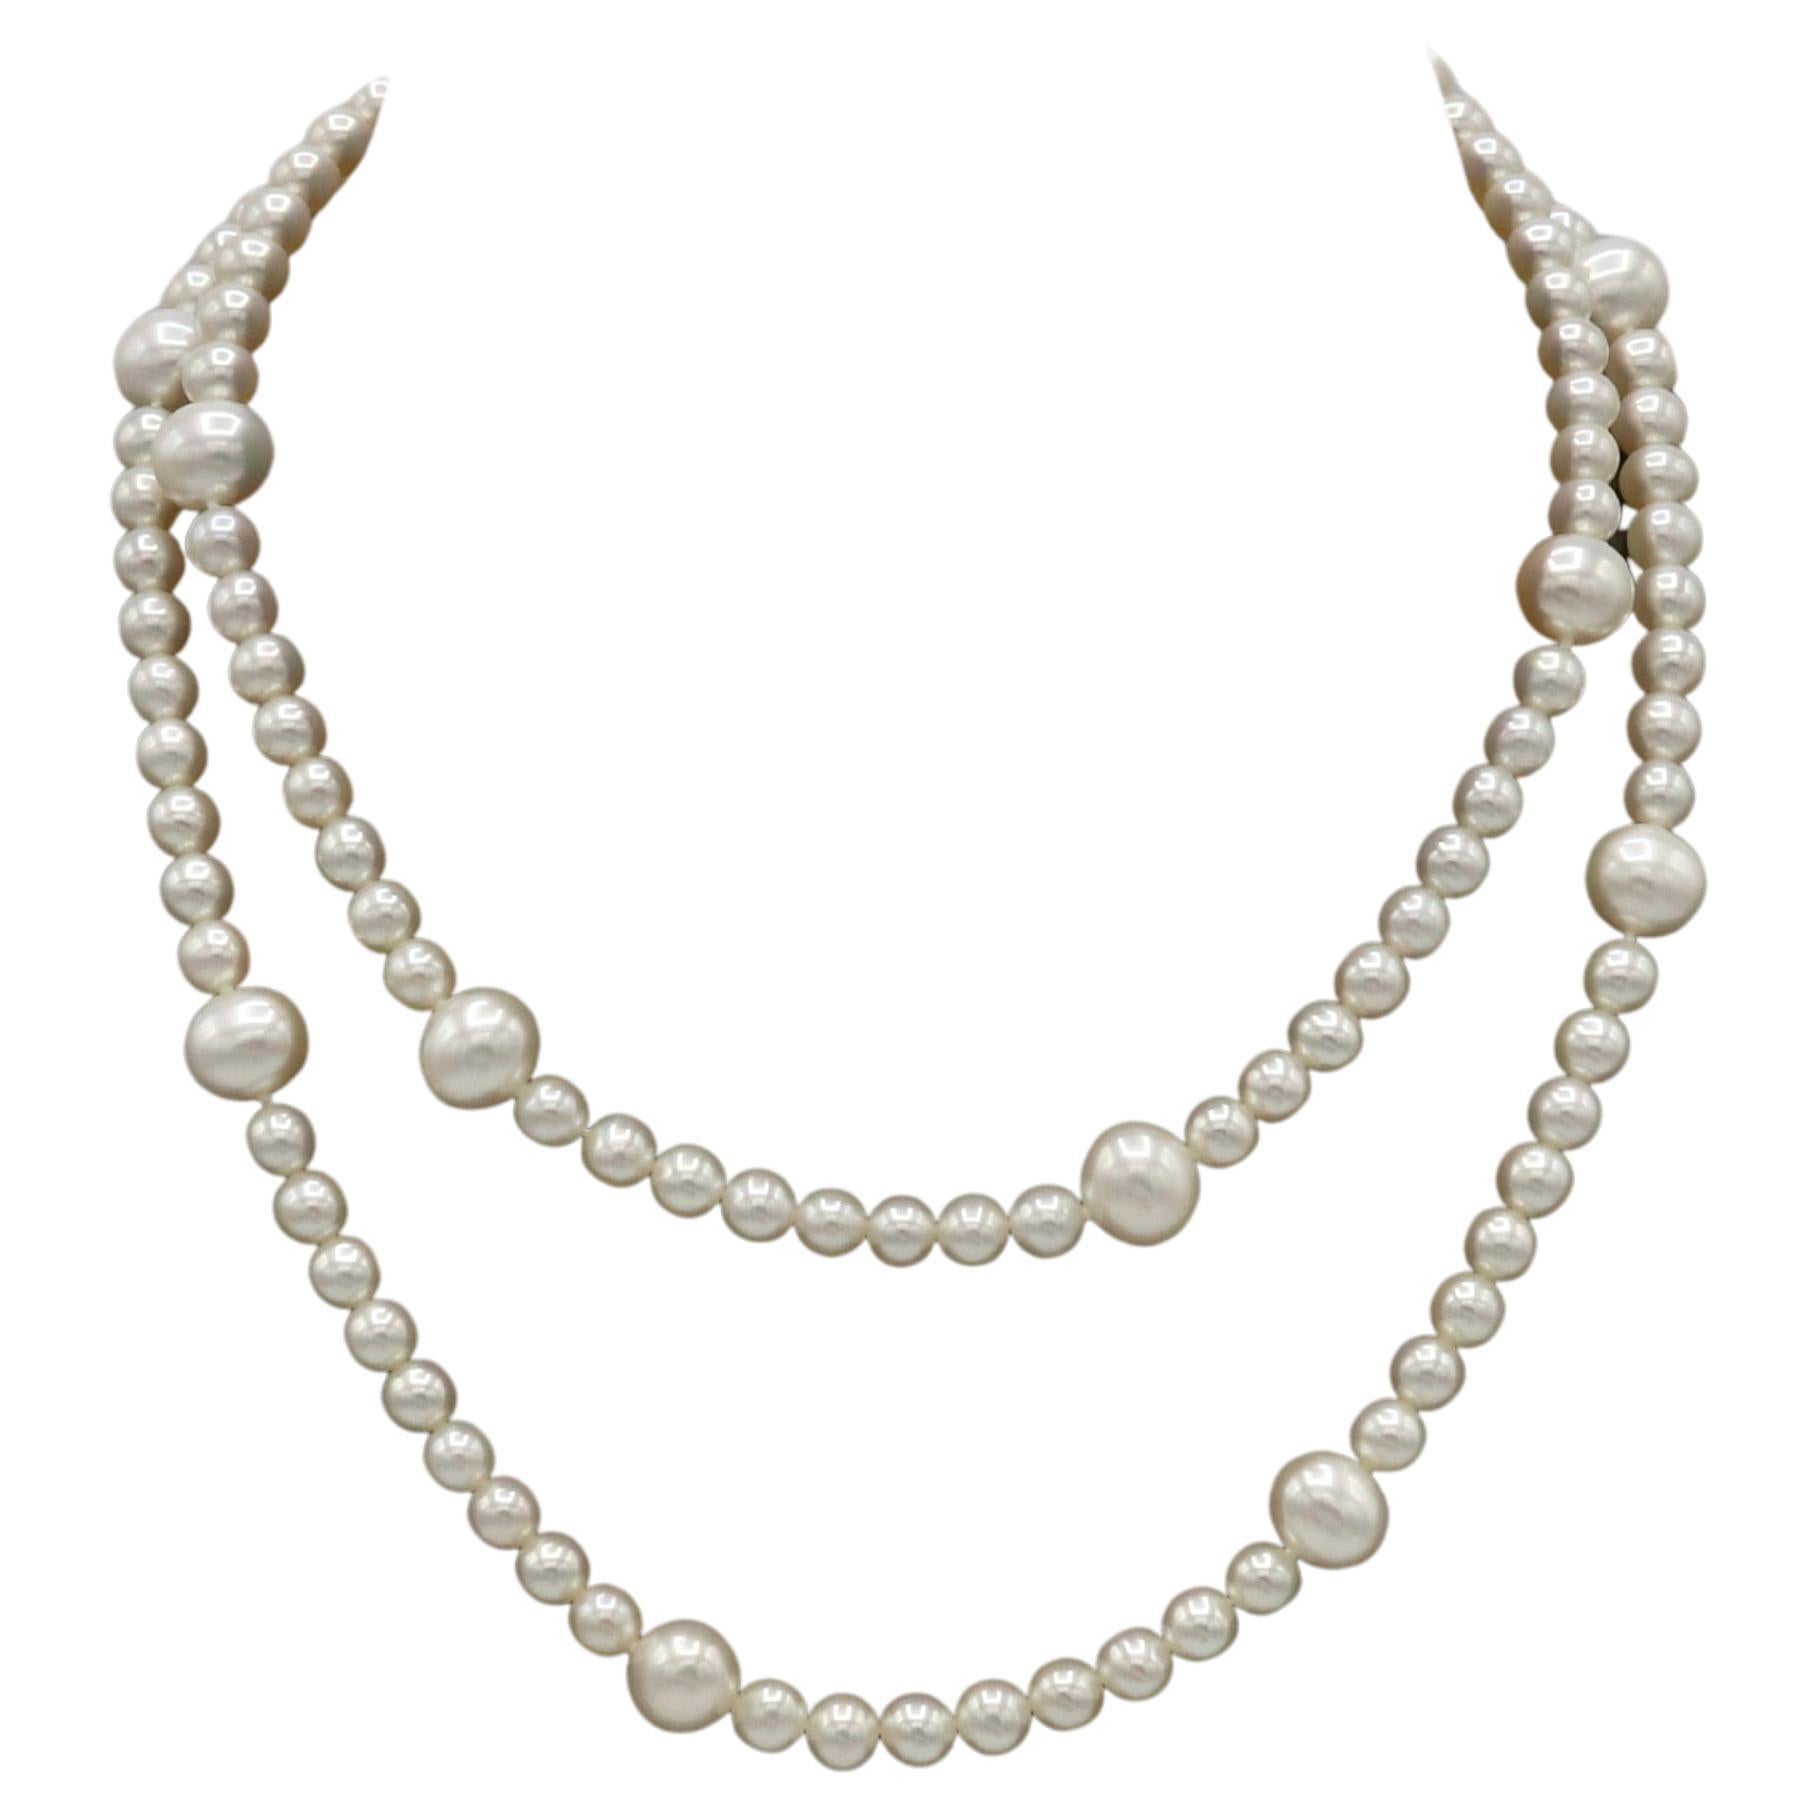 Does Tiffany & Co. use real pearls?